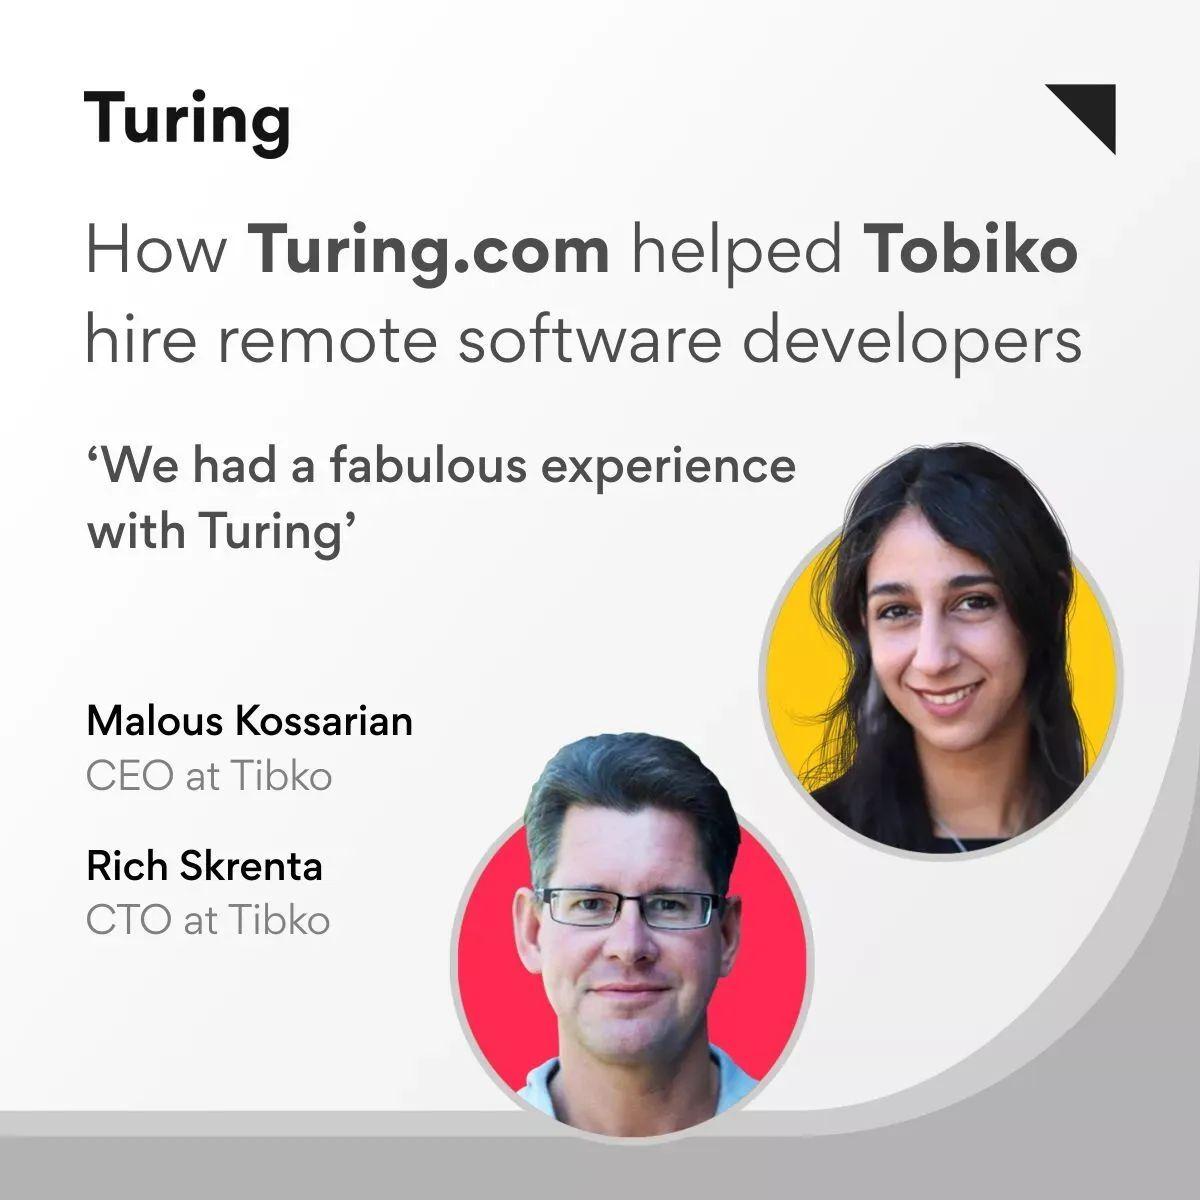 Turing-com-Review-Tobiko